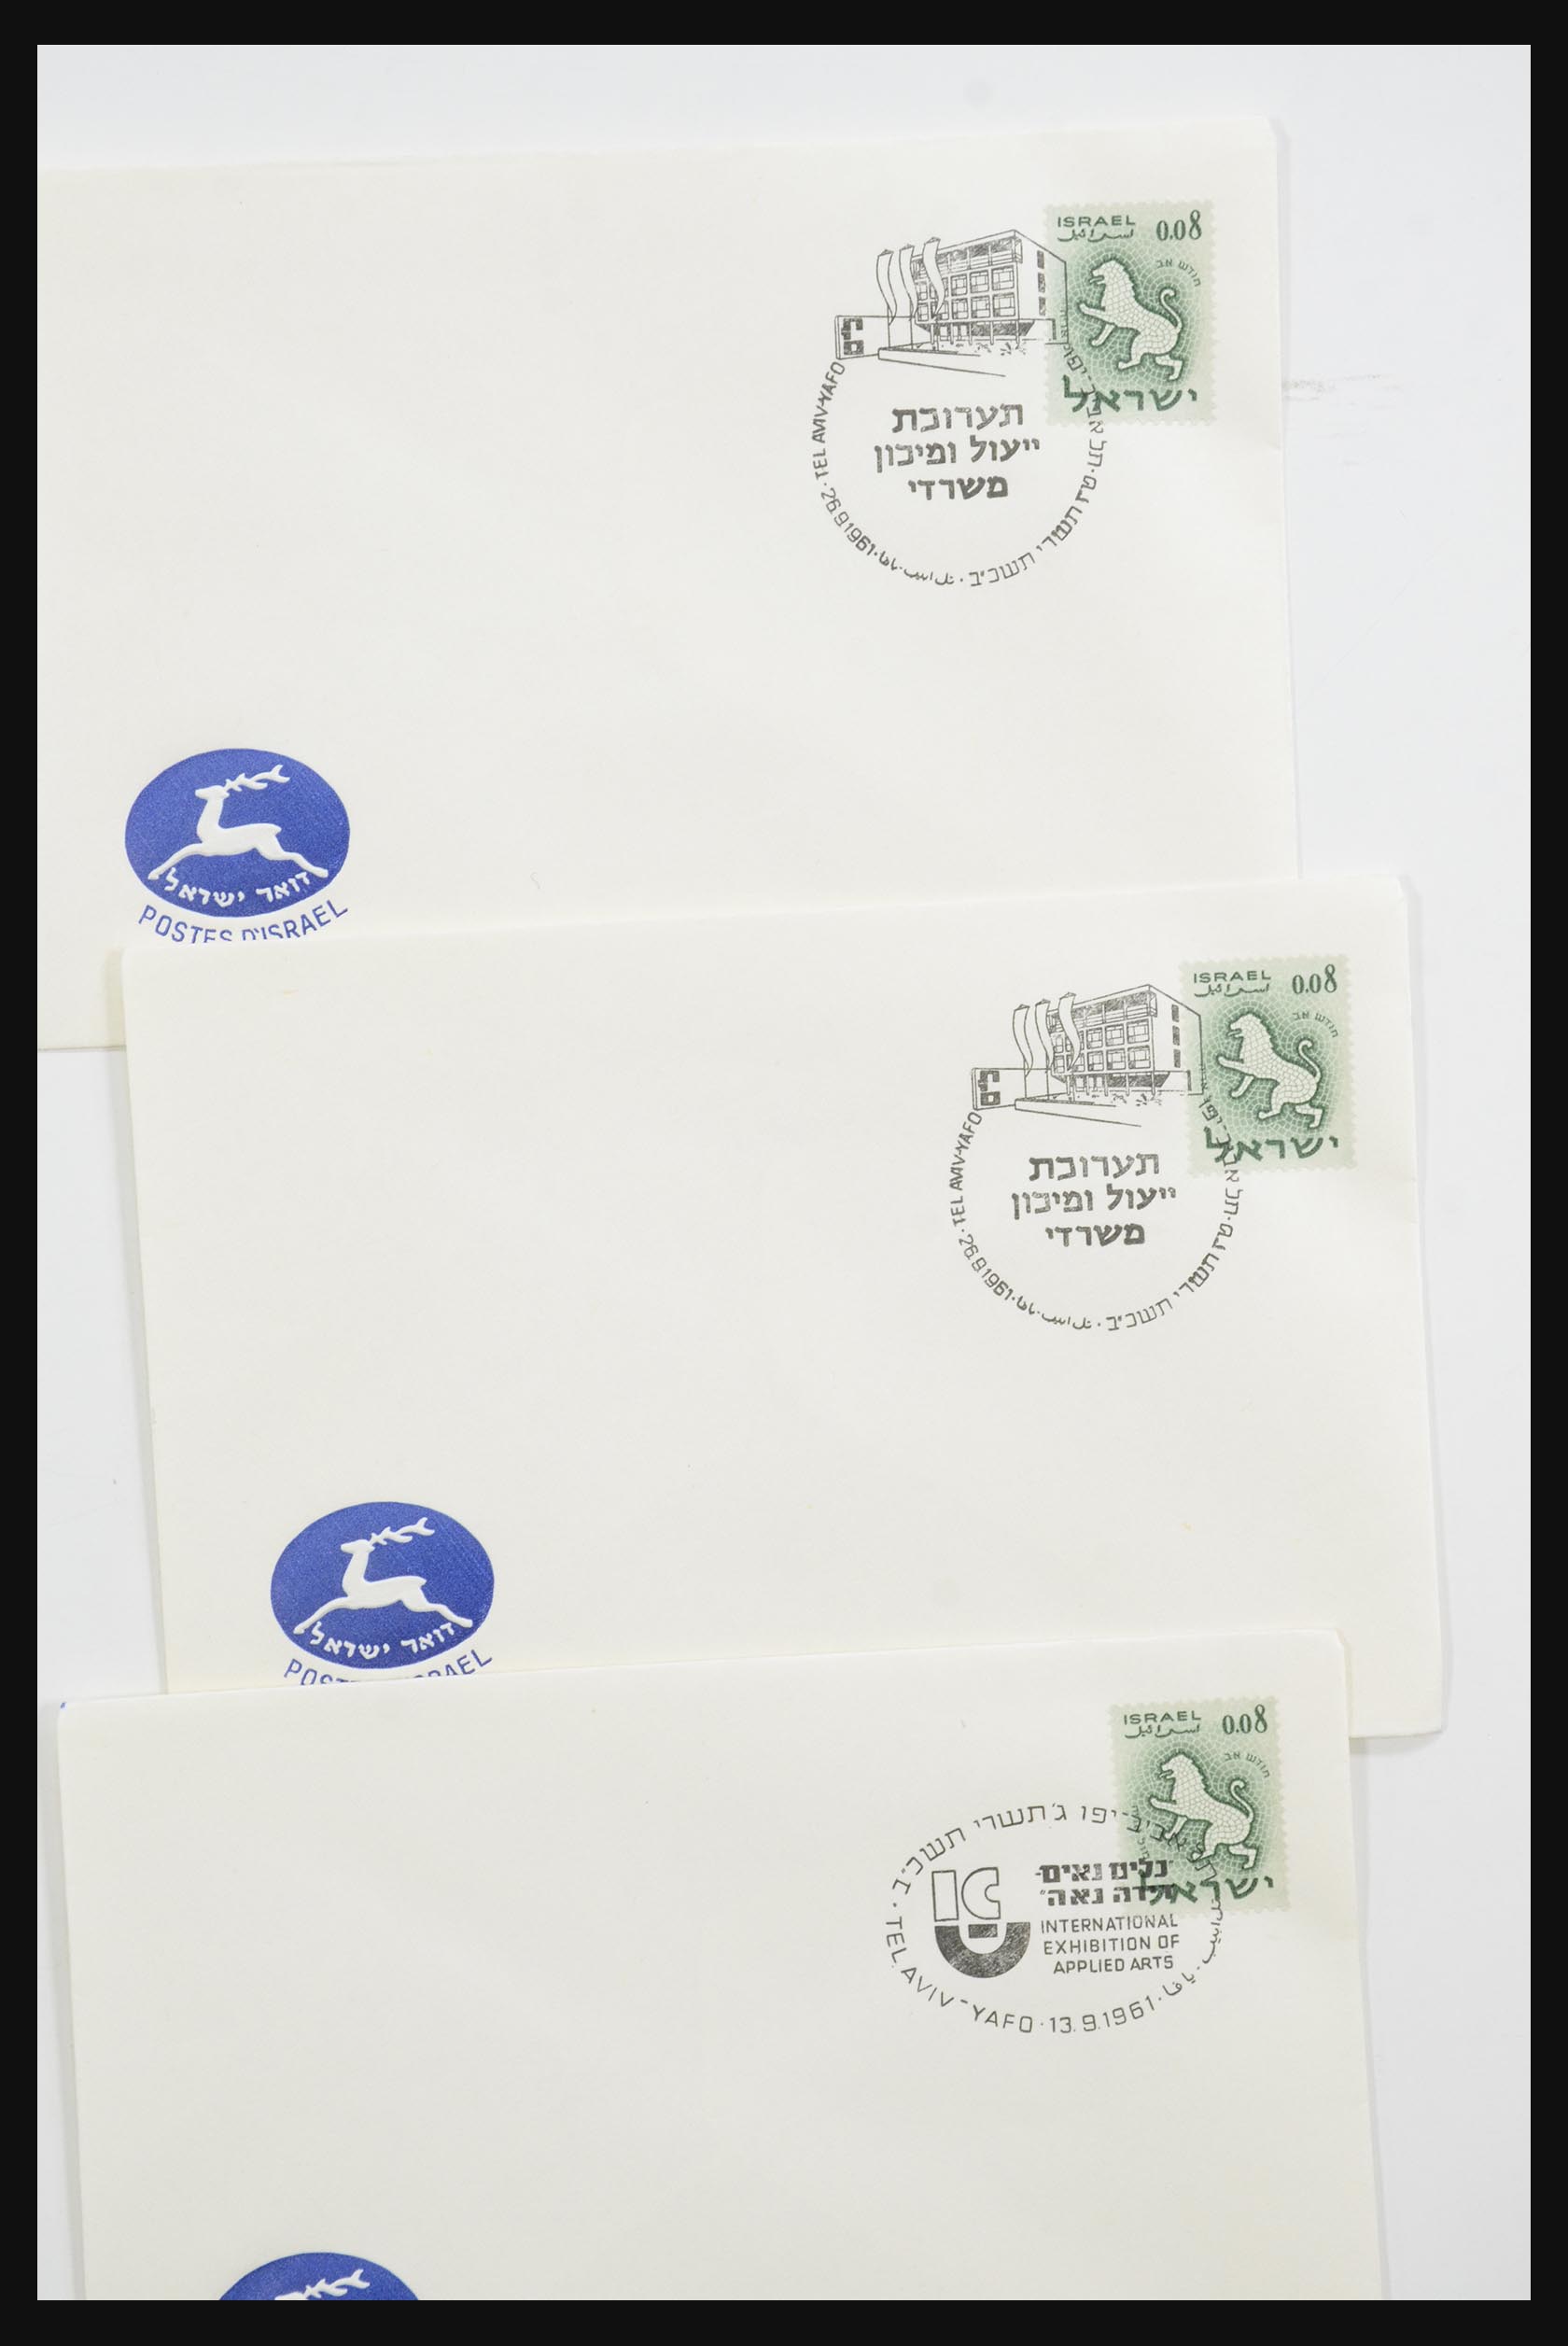 31924 026 - 31924 Israel first day cover collection 1957-2003.